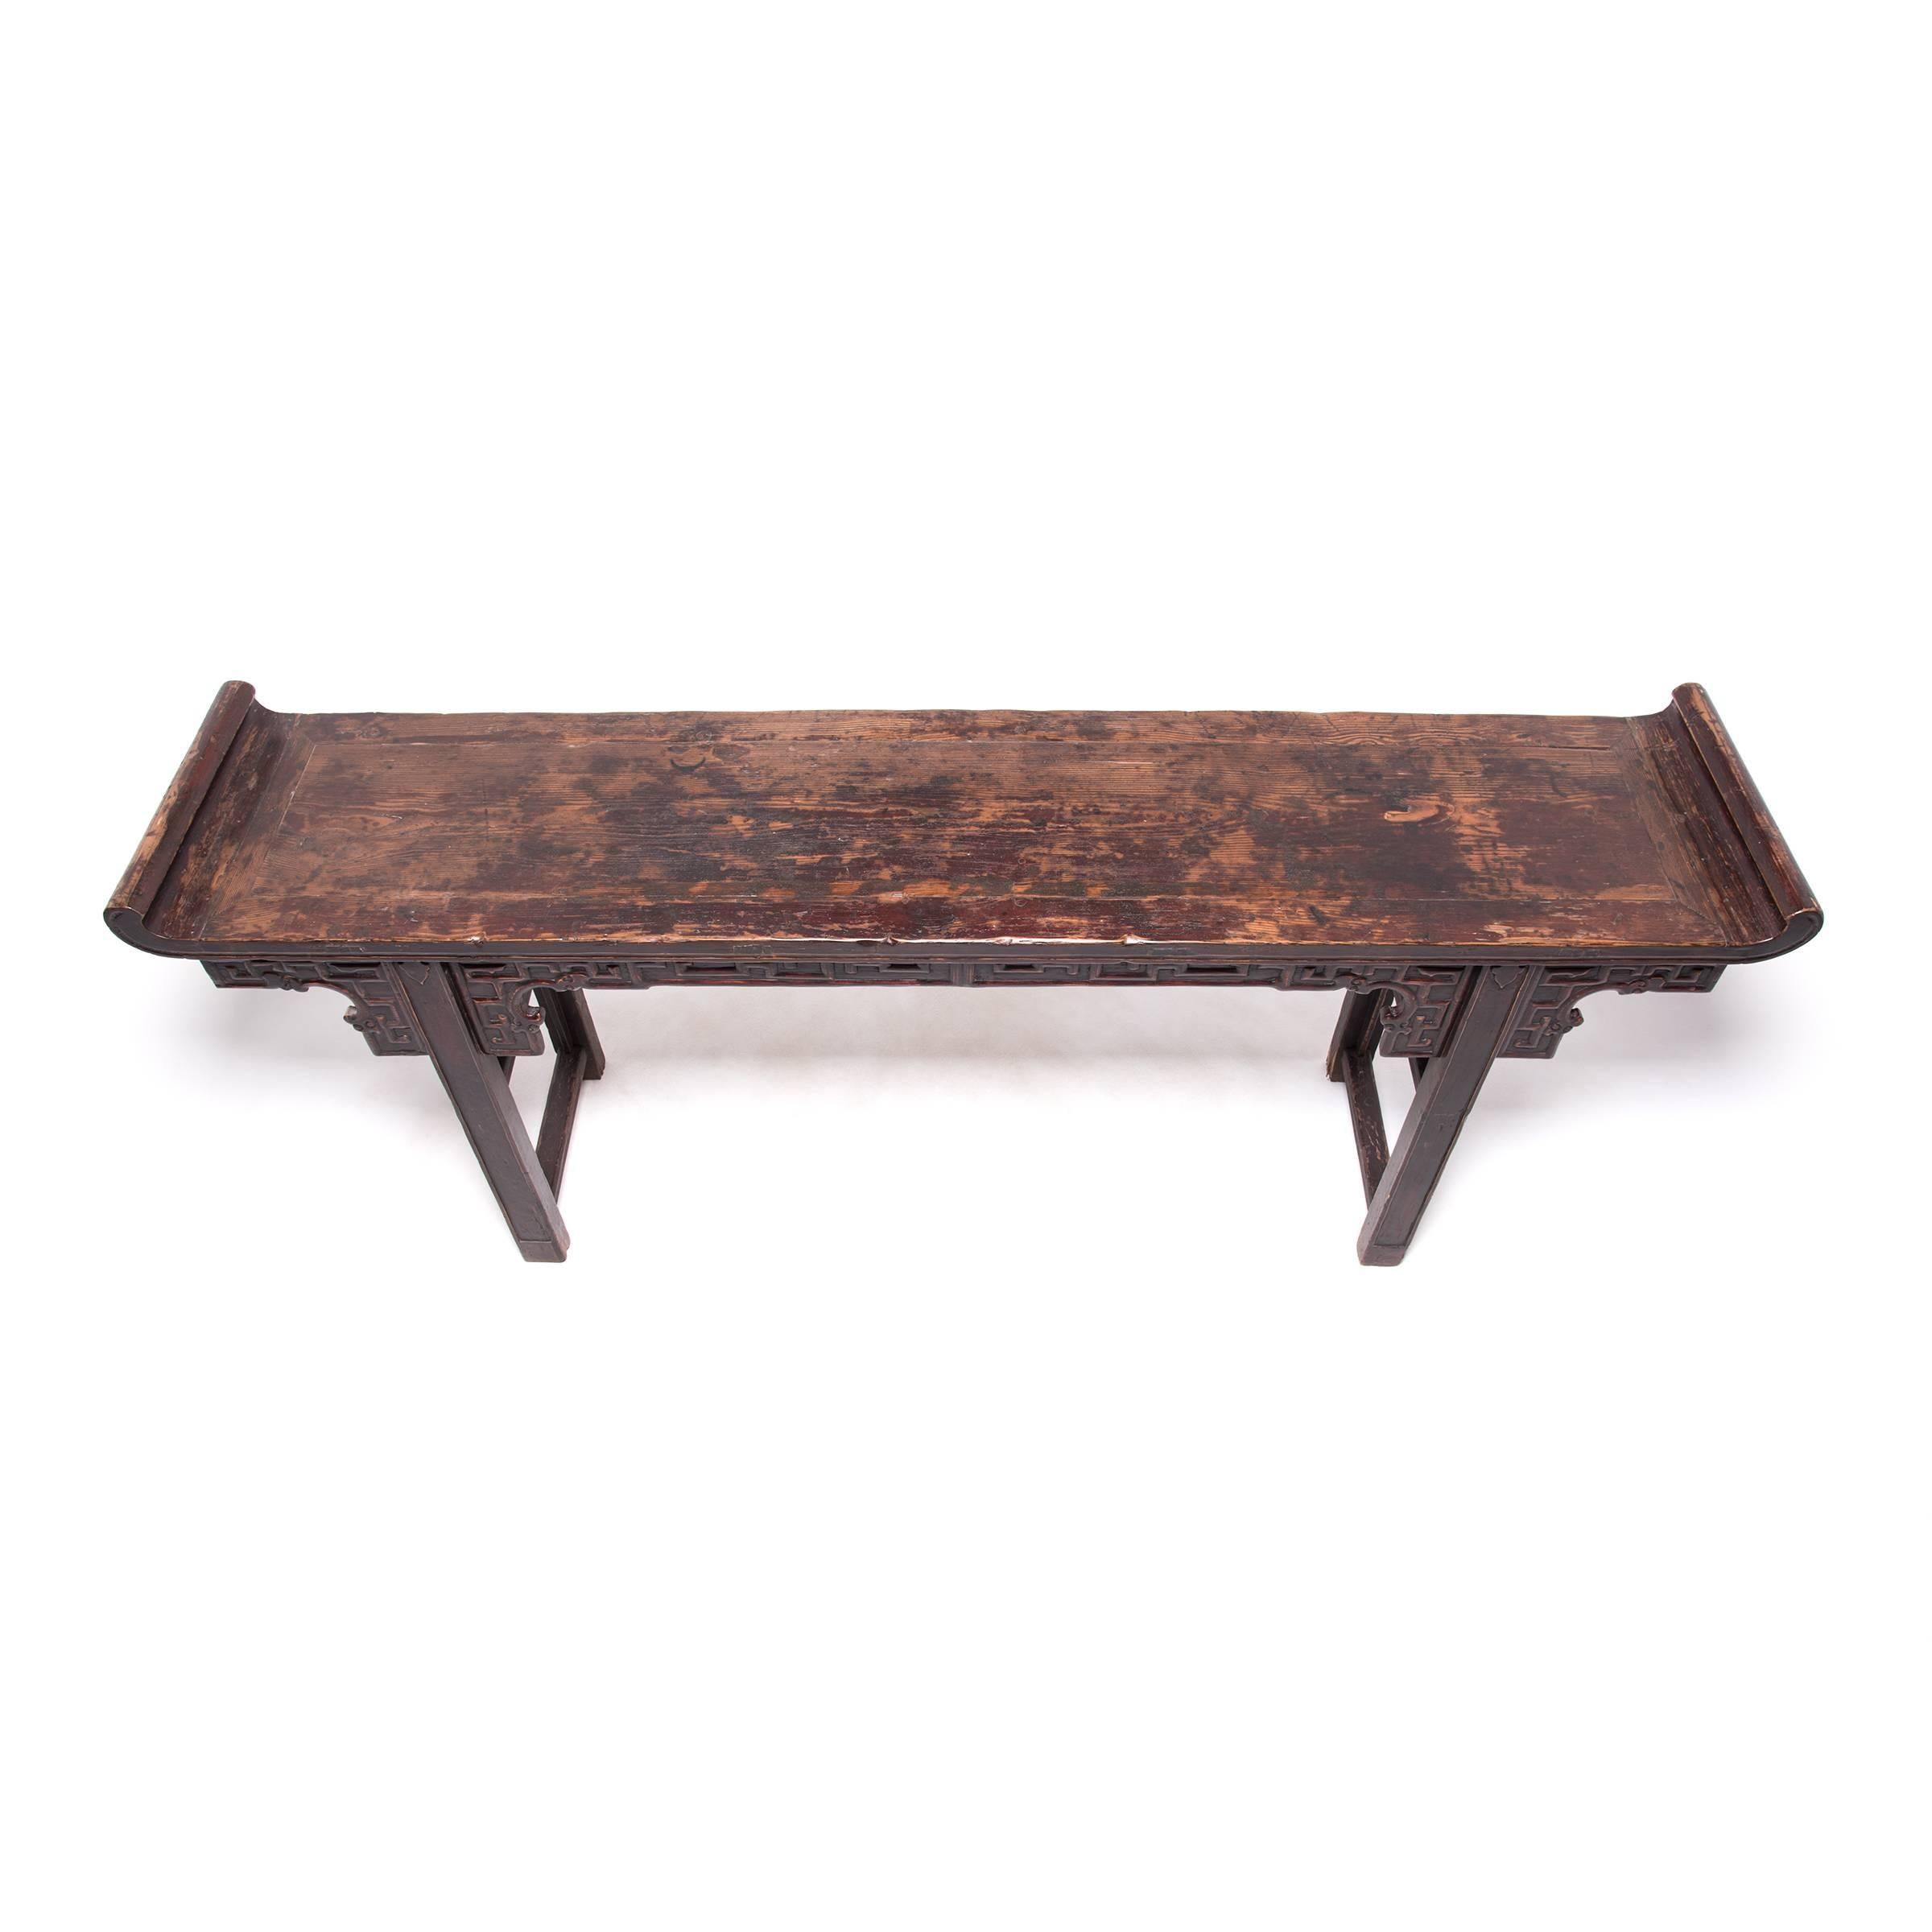 19th Century Chinese Altar Table with Everted Ends, c. 1800 For Sale